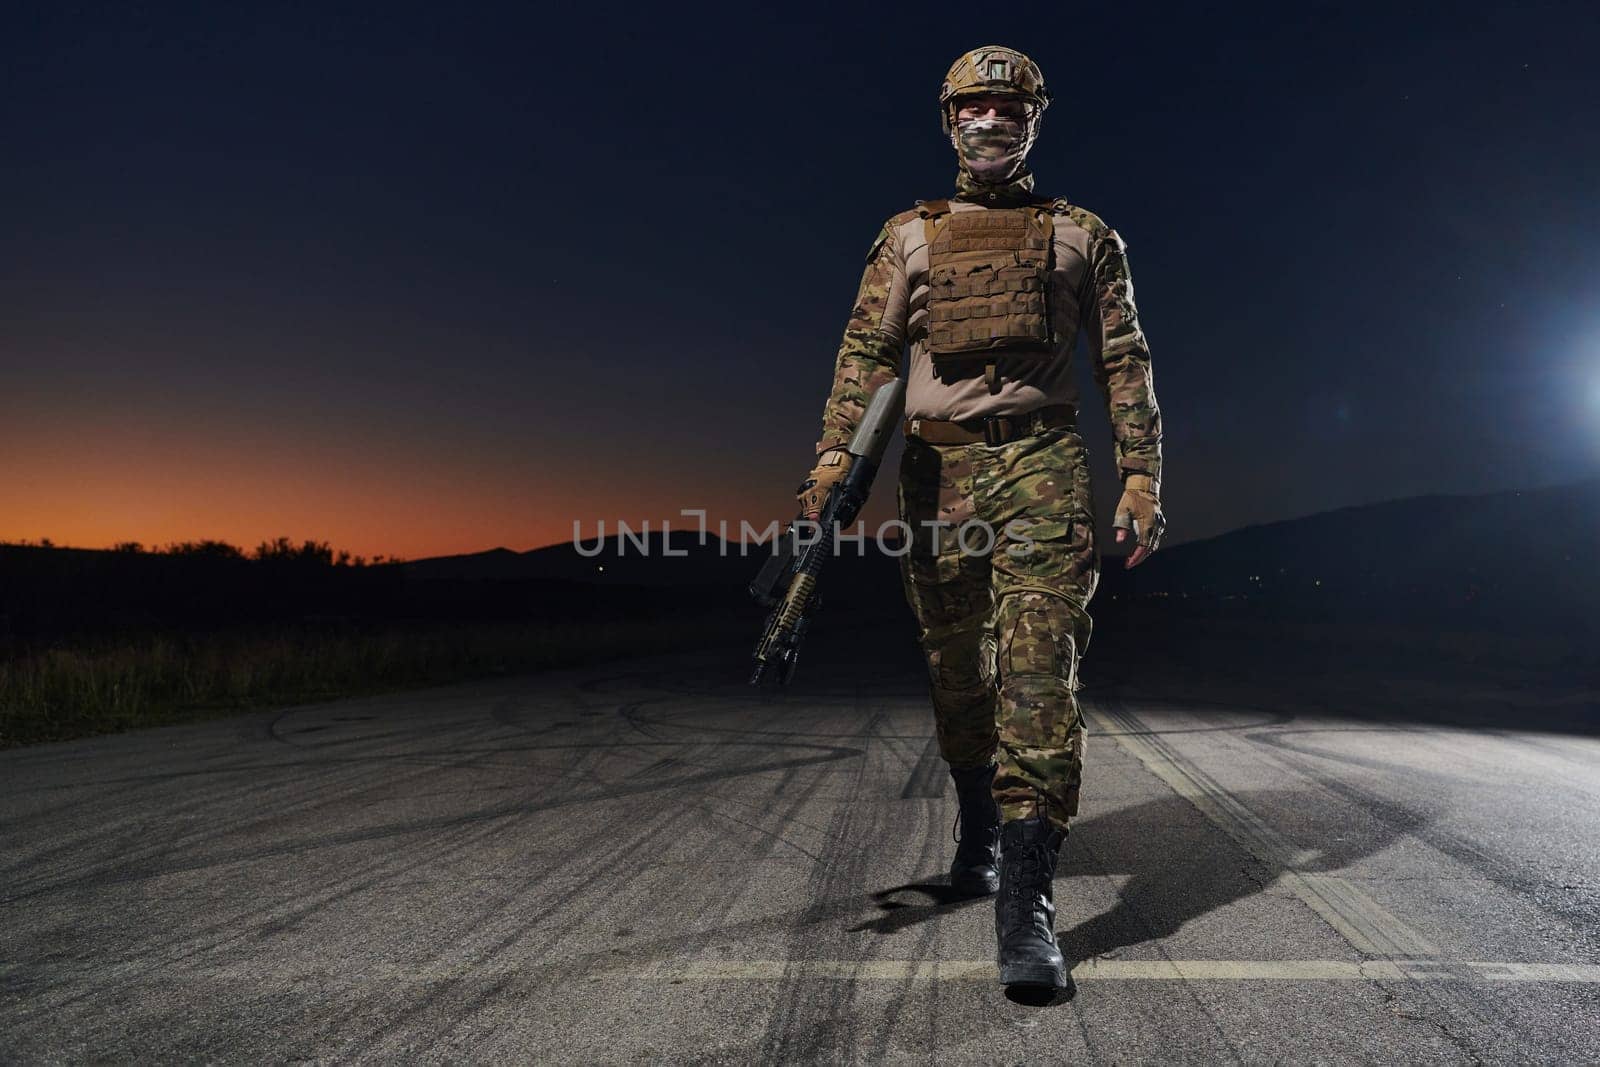 A professional soldier in full military gear striding through the dark night as he embarks on a perilous military mission.